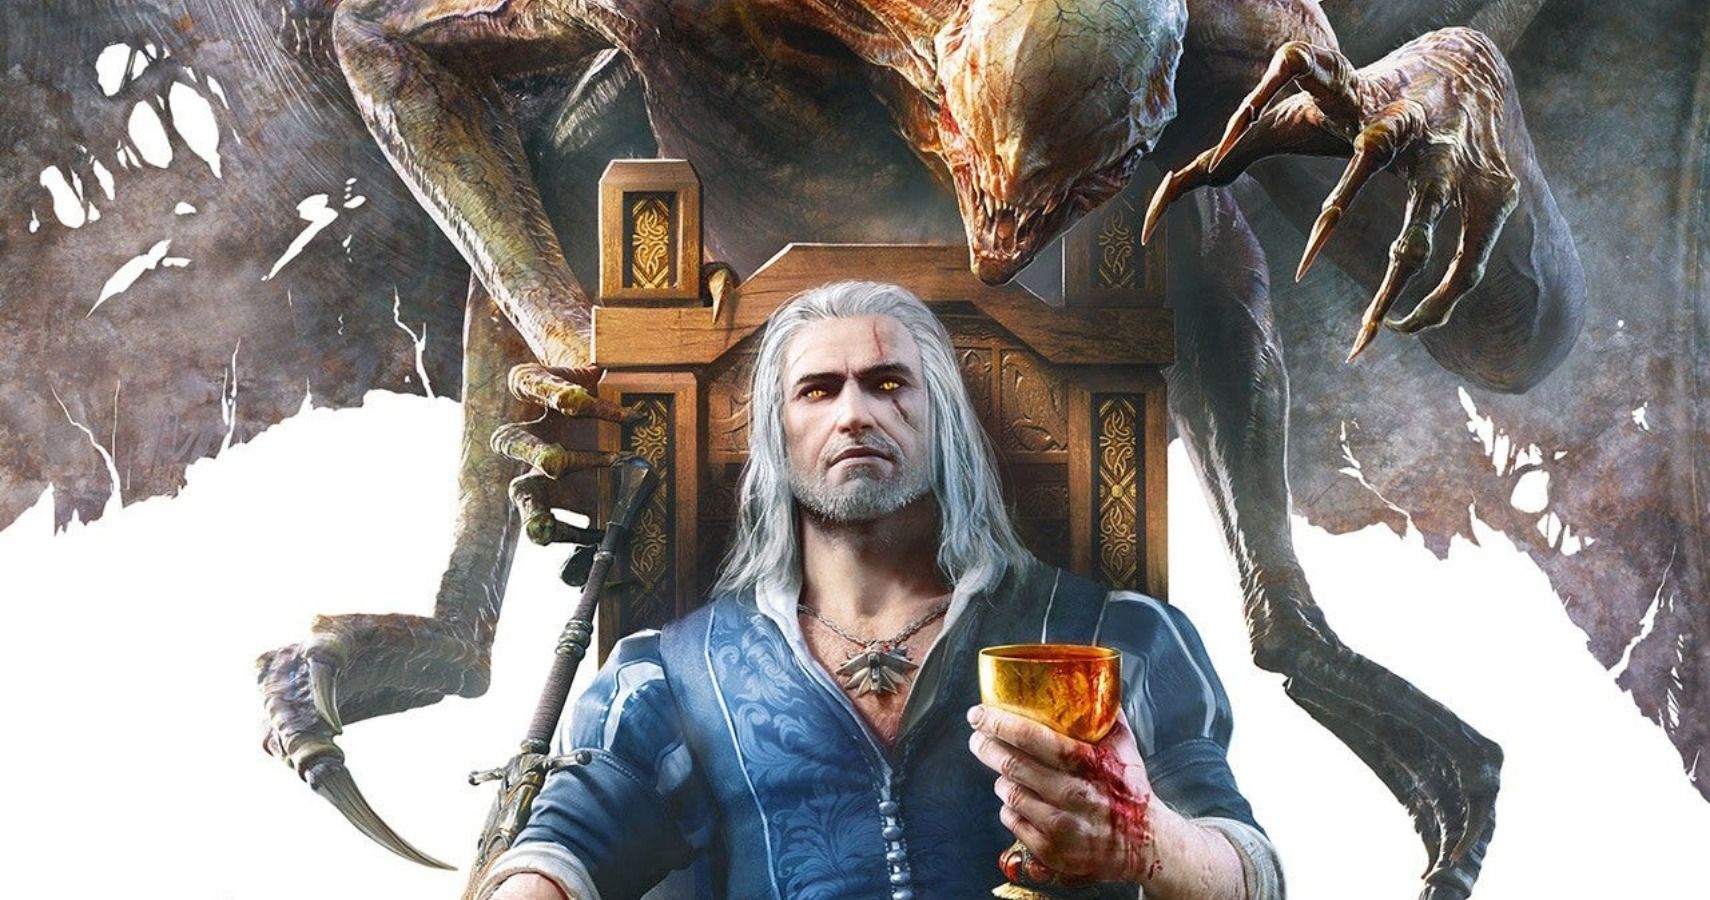 Is The Witcher 3 DLC Worth It?